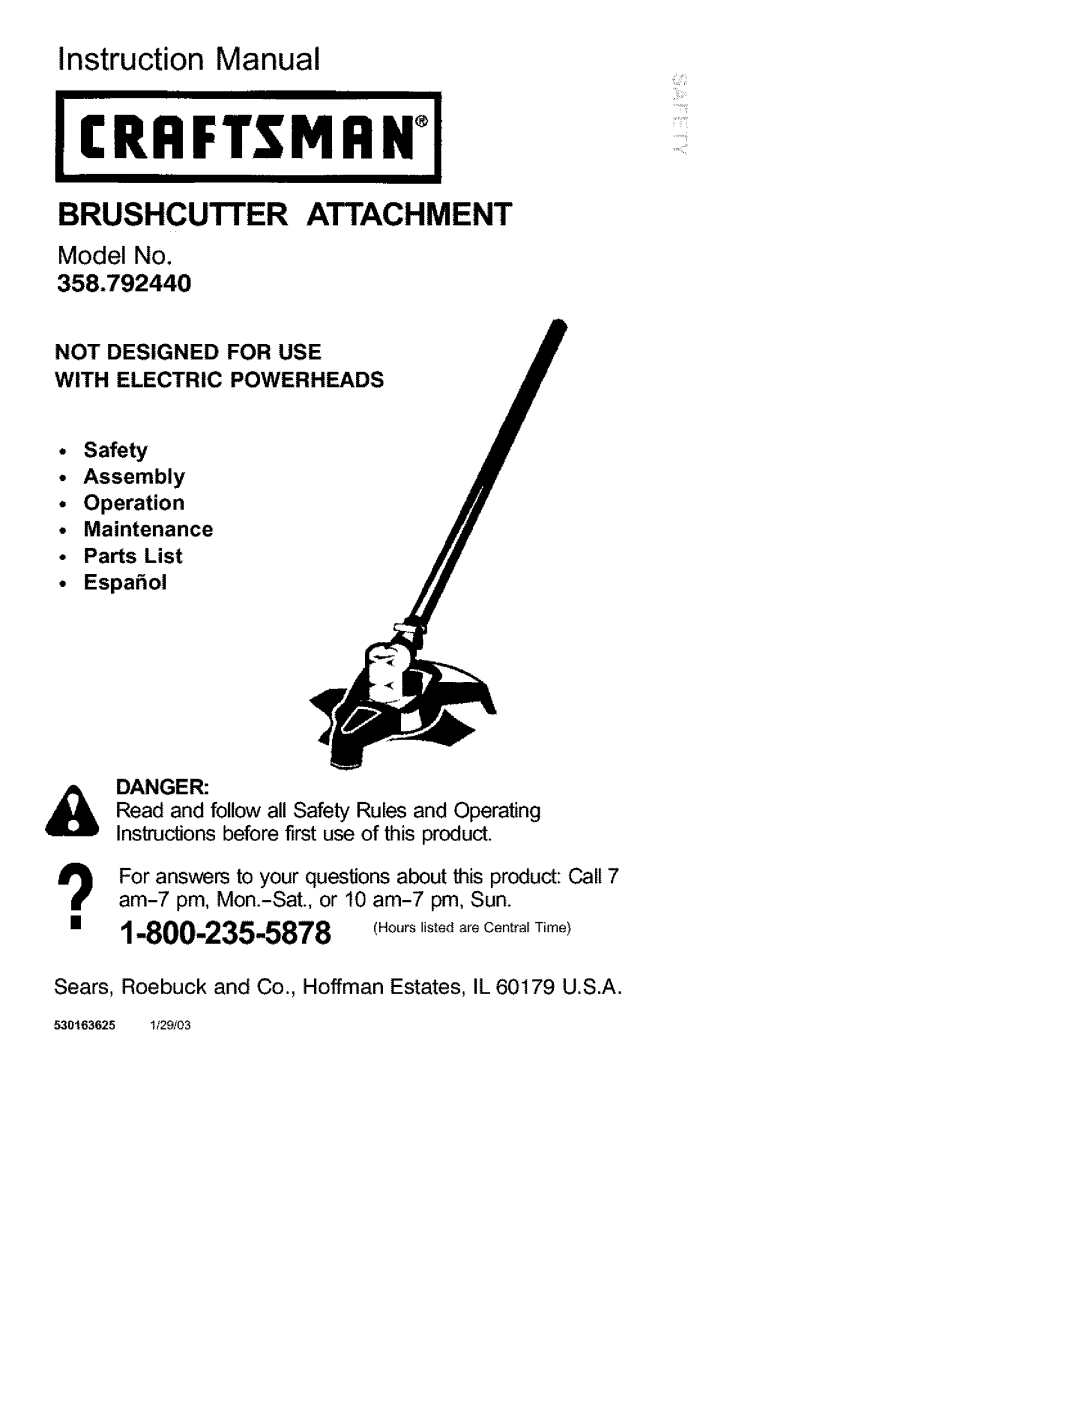 Craftsman 358.792440 instruction manual Model No, Brushcutter Attachment, Not Designed For Use With Electric Powerheads 